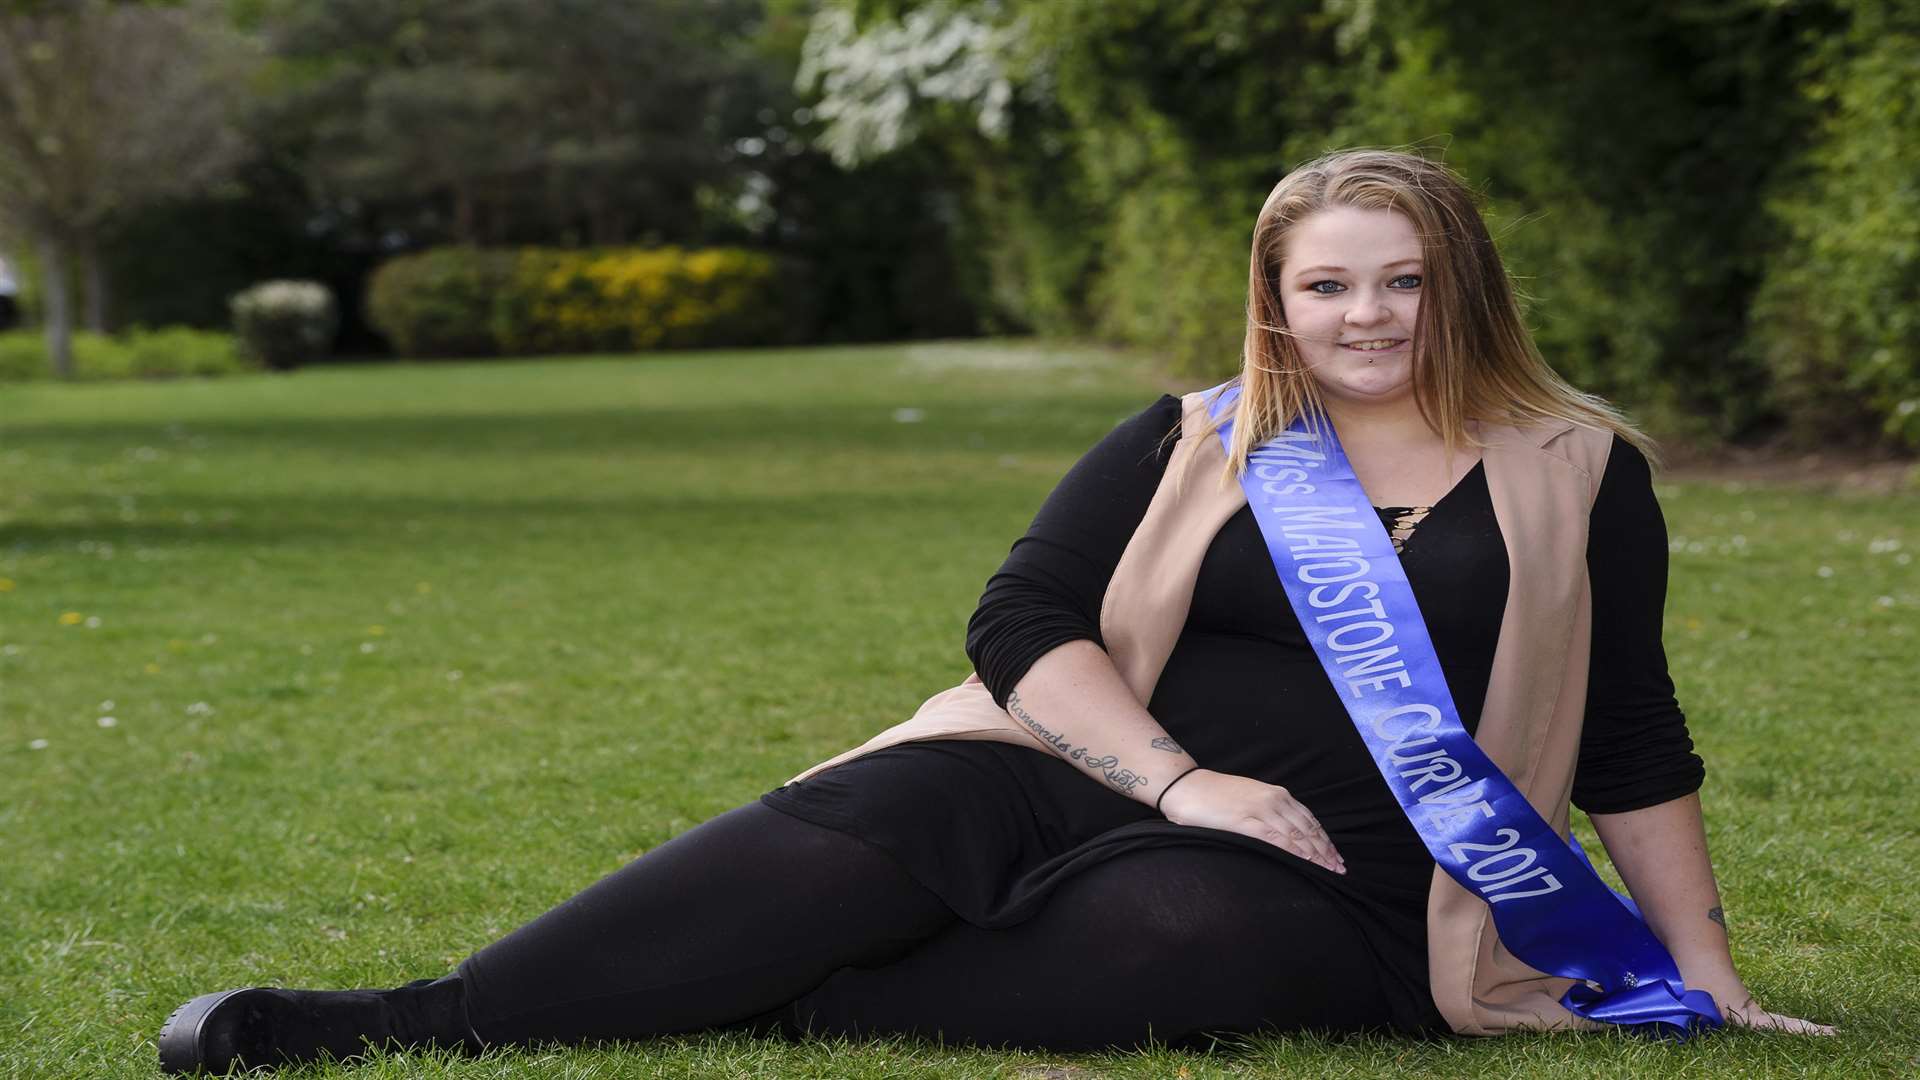 Emma was crowned Miss Maidstone Curve and is playing her part in the national Miss Curvy pageant